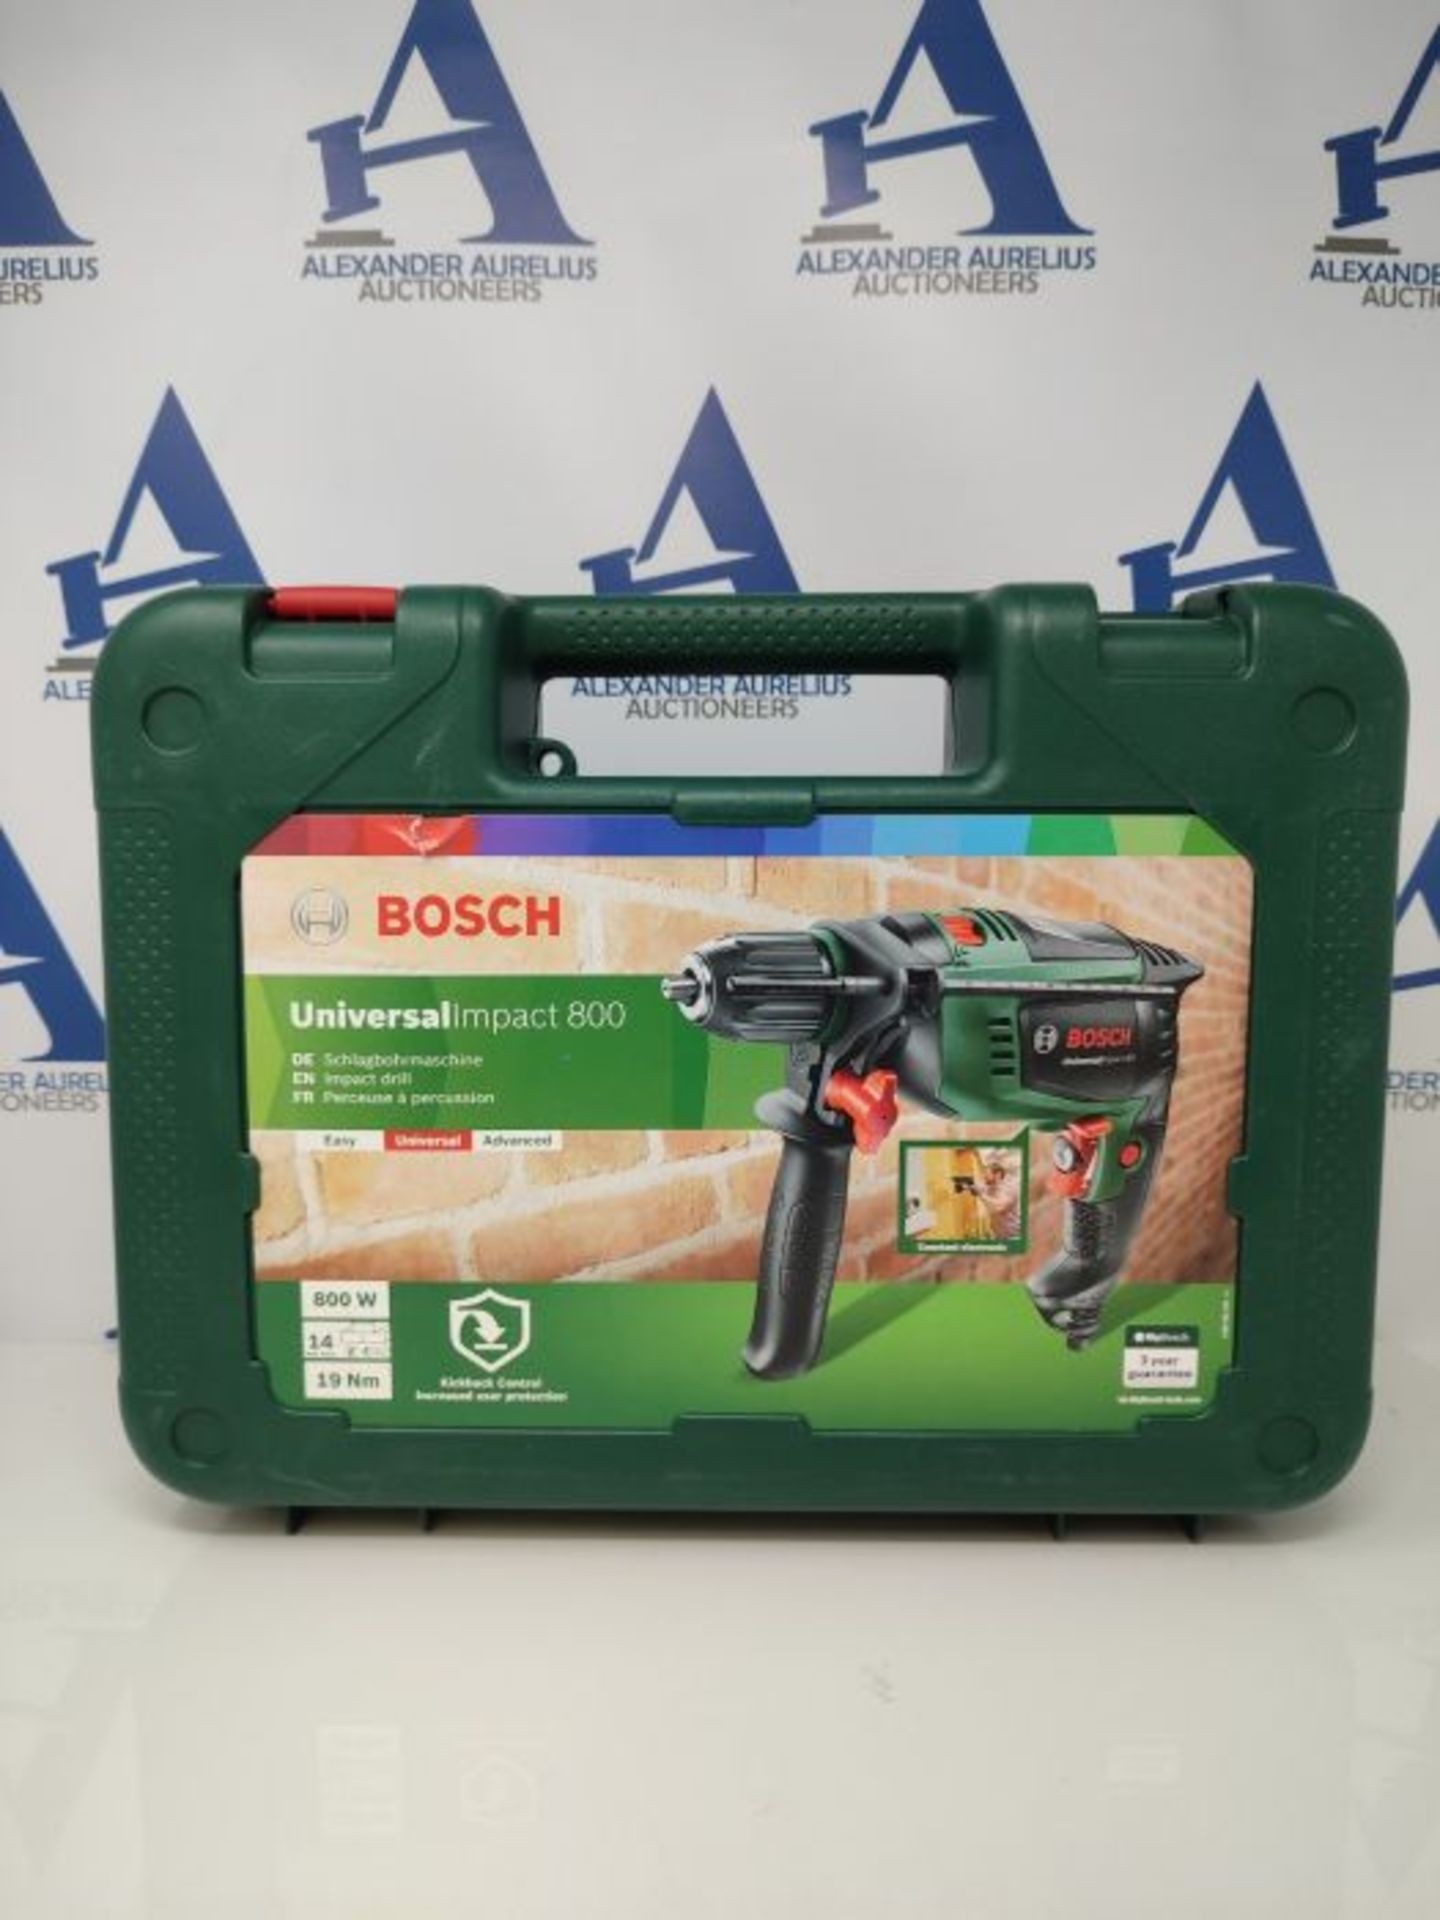 RRP £74.00 Bosch Home and Garden UniversalImpact 800 1-speed impact drill 800 W incl. suitcase - Image 2 of 3